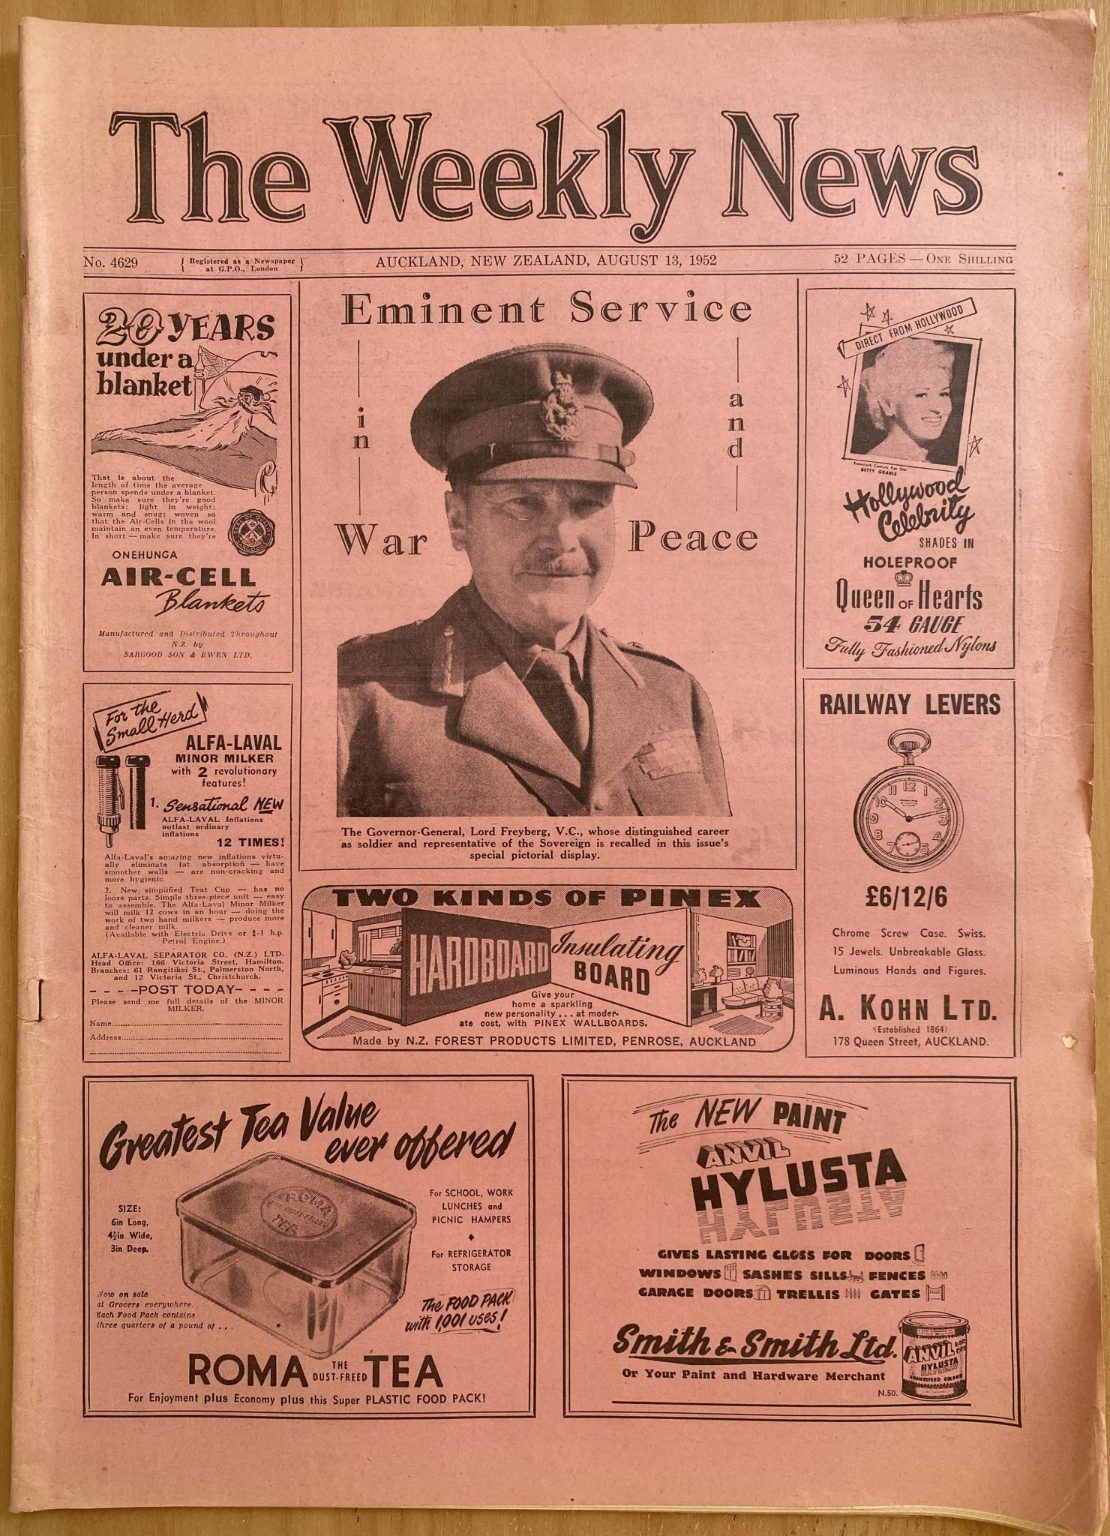 OLD NEWSPAPER: The Weekly News - No. 4629, 13 August 1952